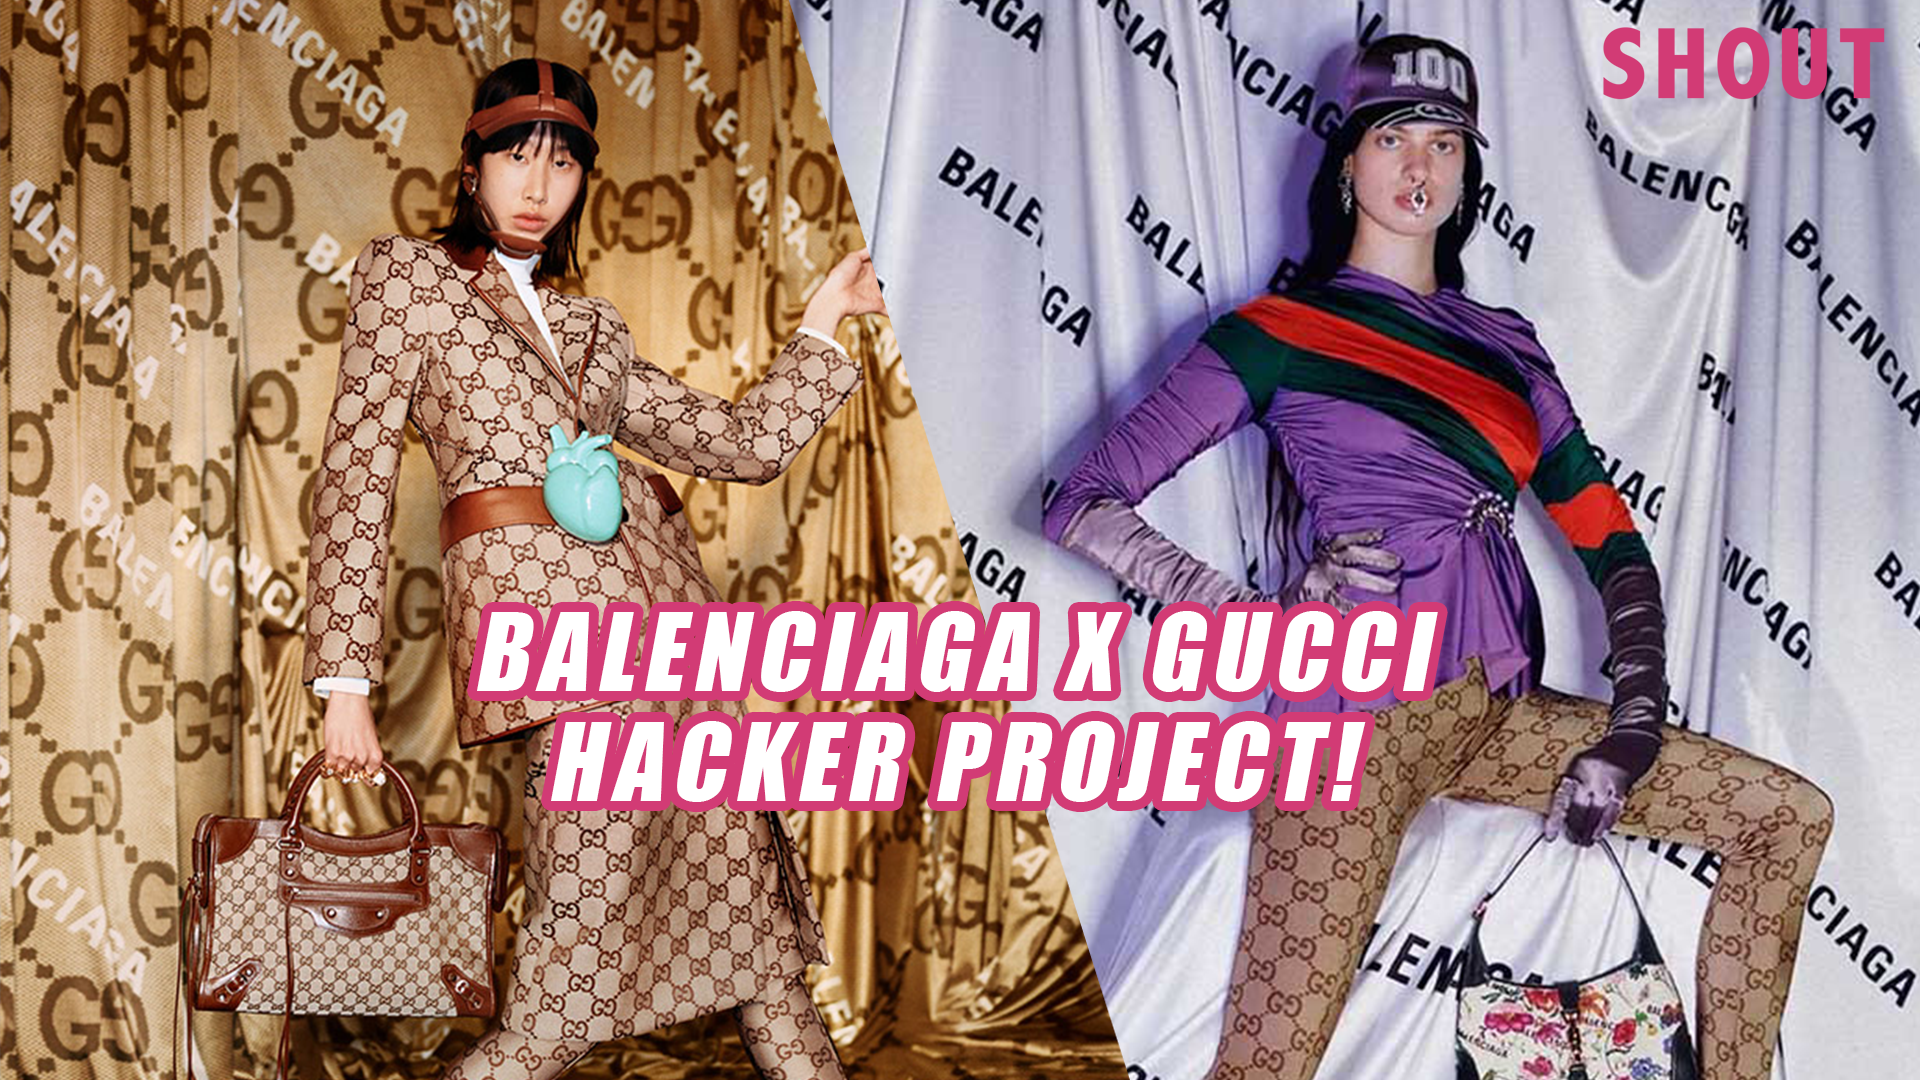 GUCCI X BALENCIAGA TEAM UP IN THE HACKER PROJECT - Shout